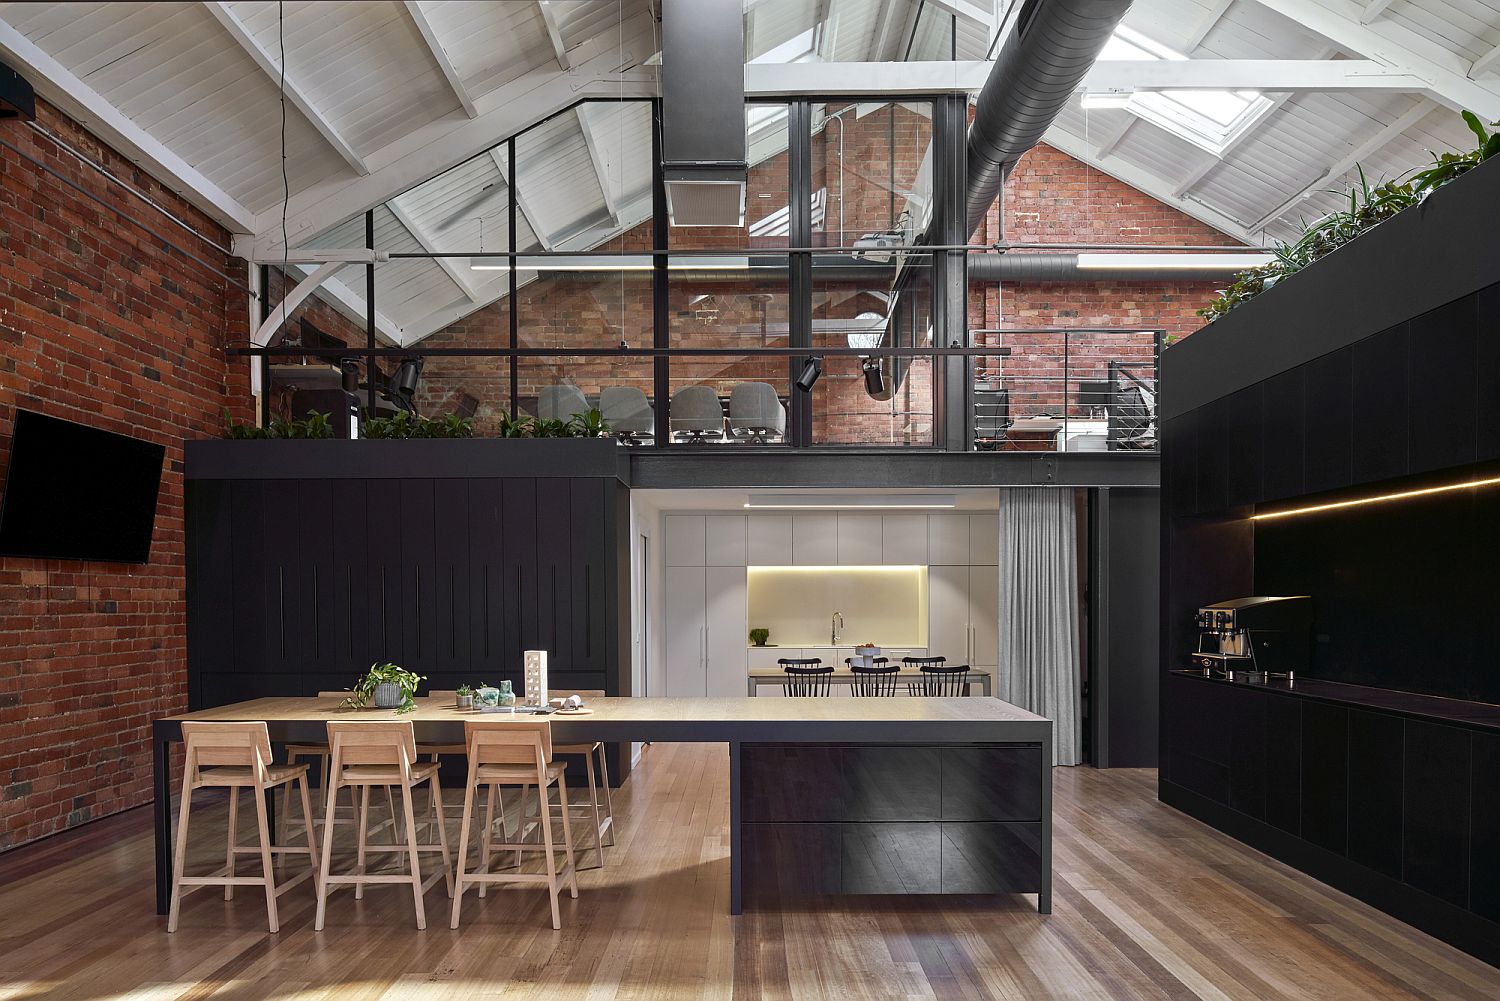 Wood brick and polished modern surfaces find space here